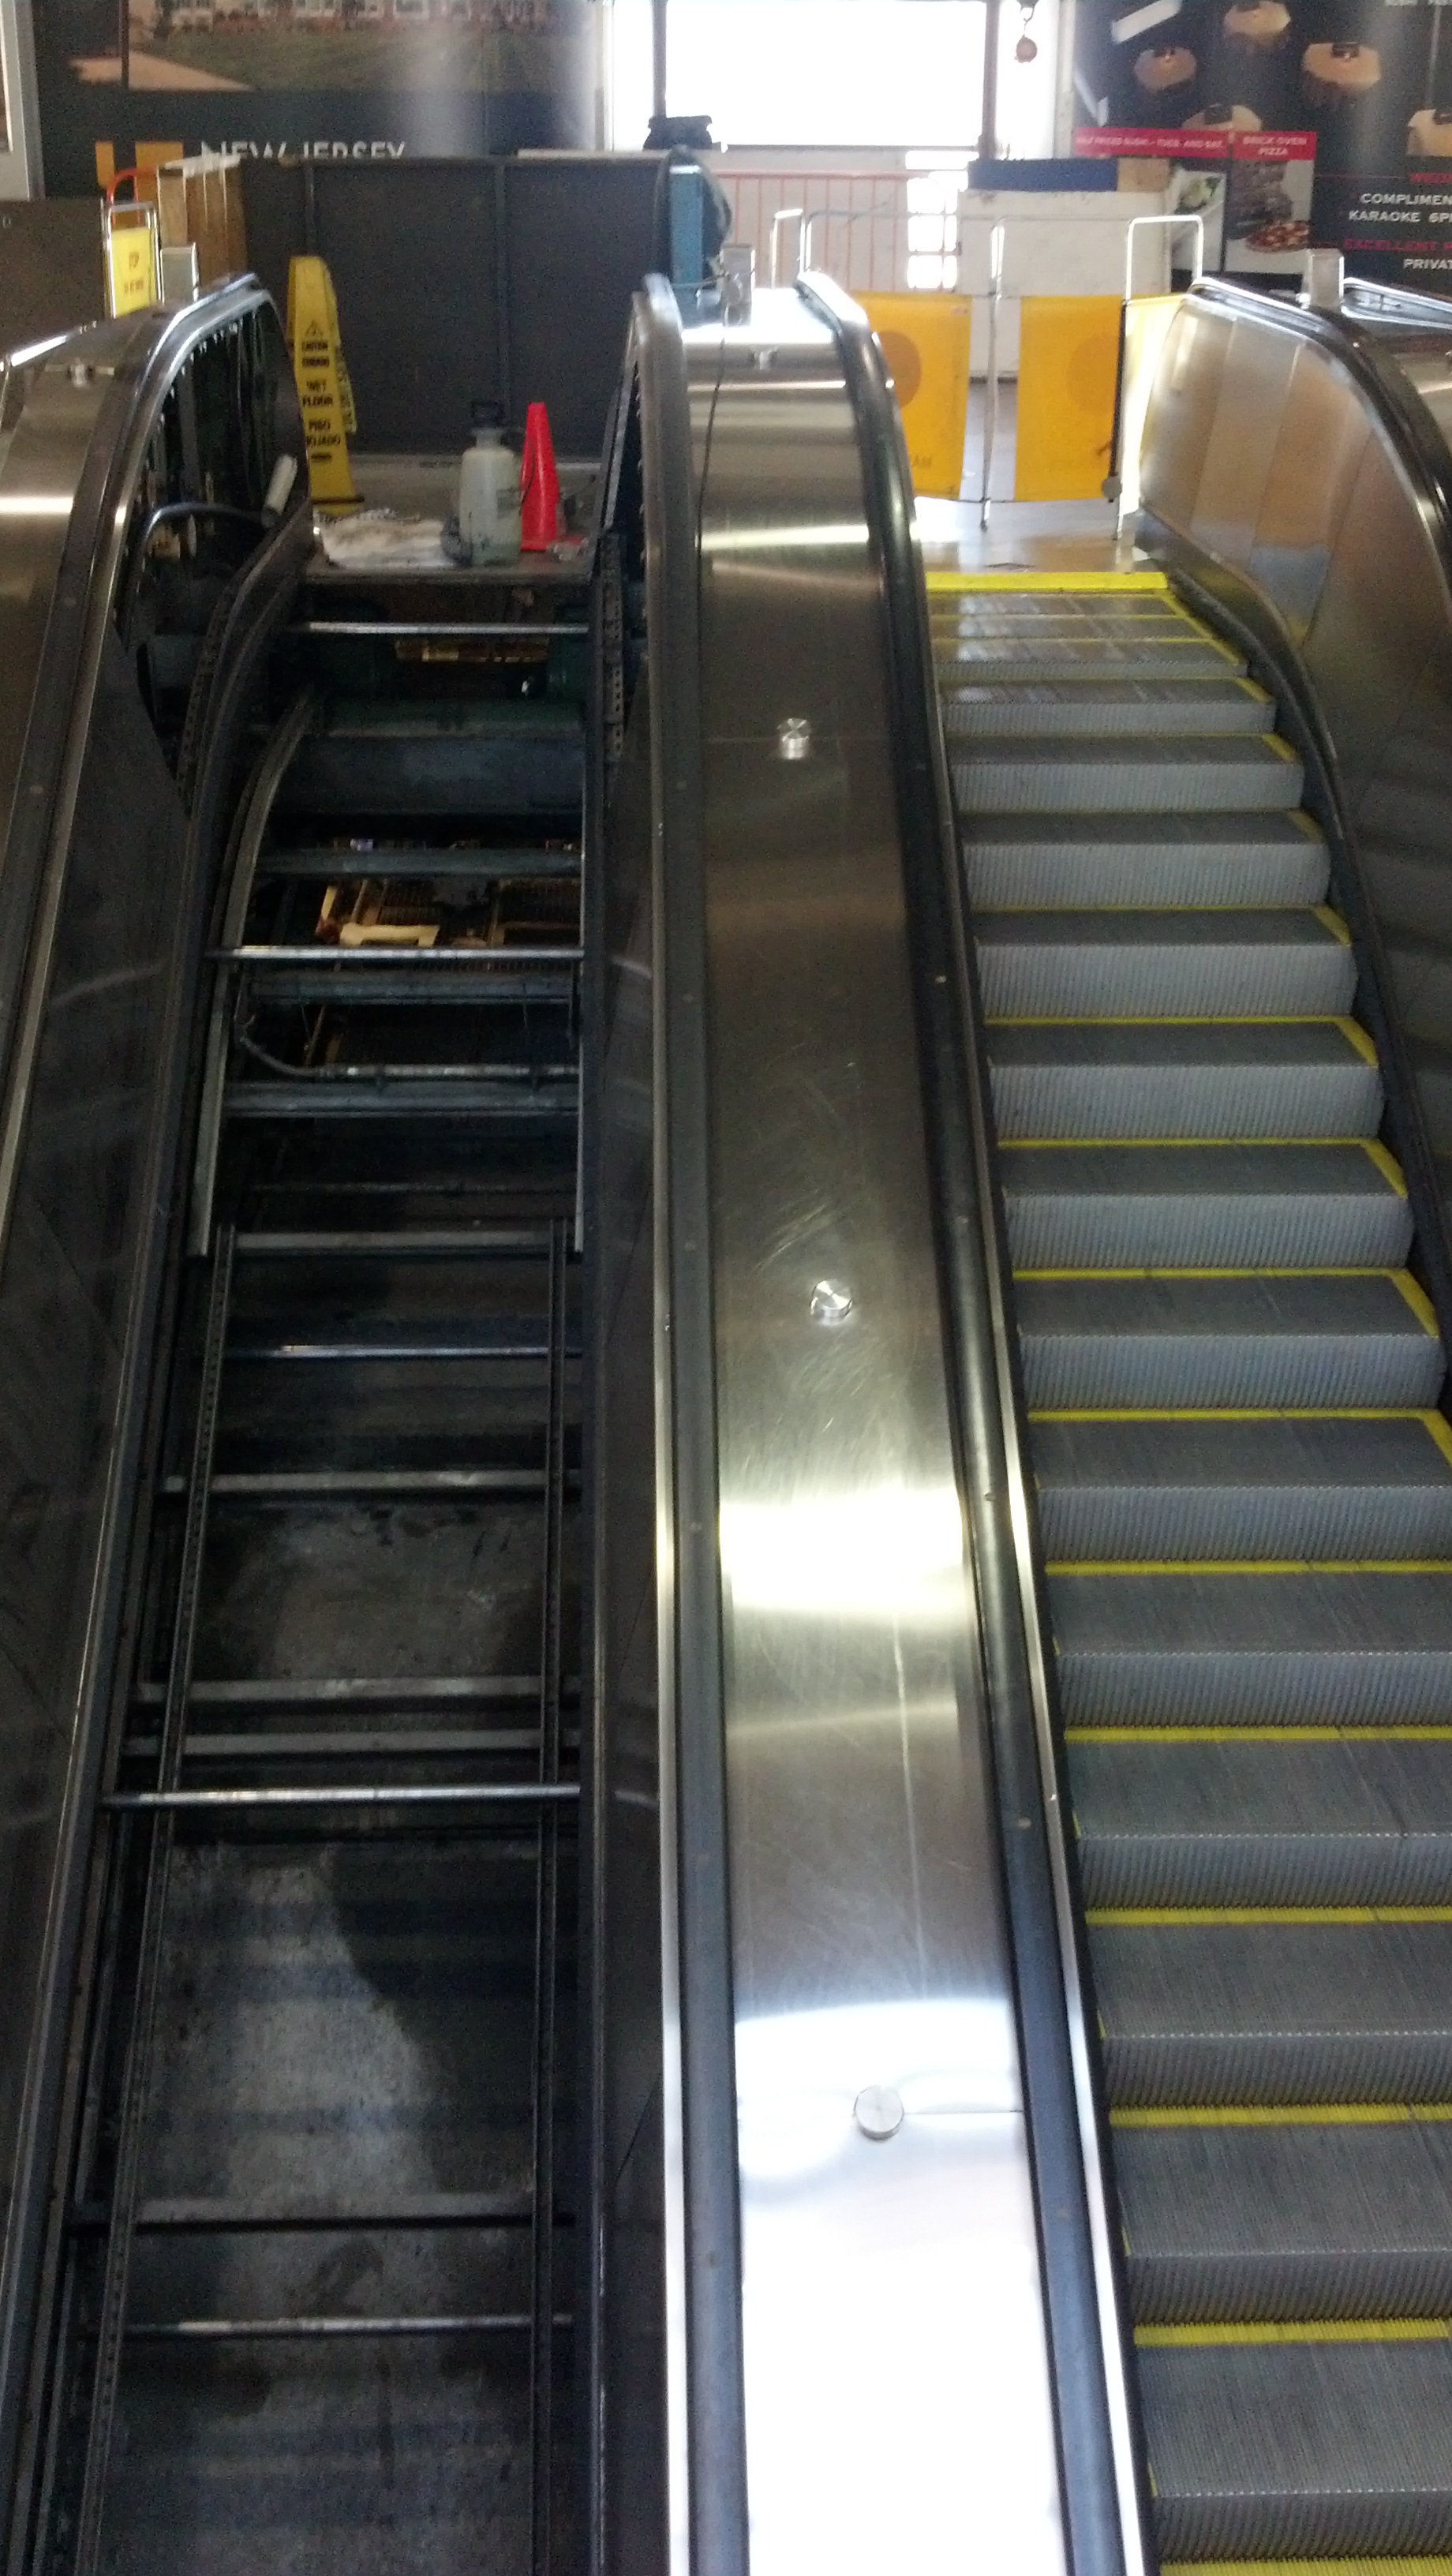 Escalators out of service at the Exchange Place PATH station in Jersey City - Jan. 7, 2013 (credit: Marla Diamond / WCBS 880)